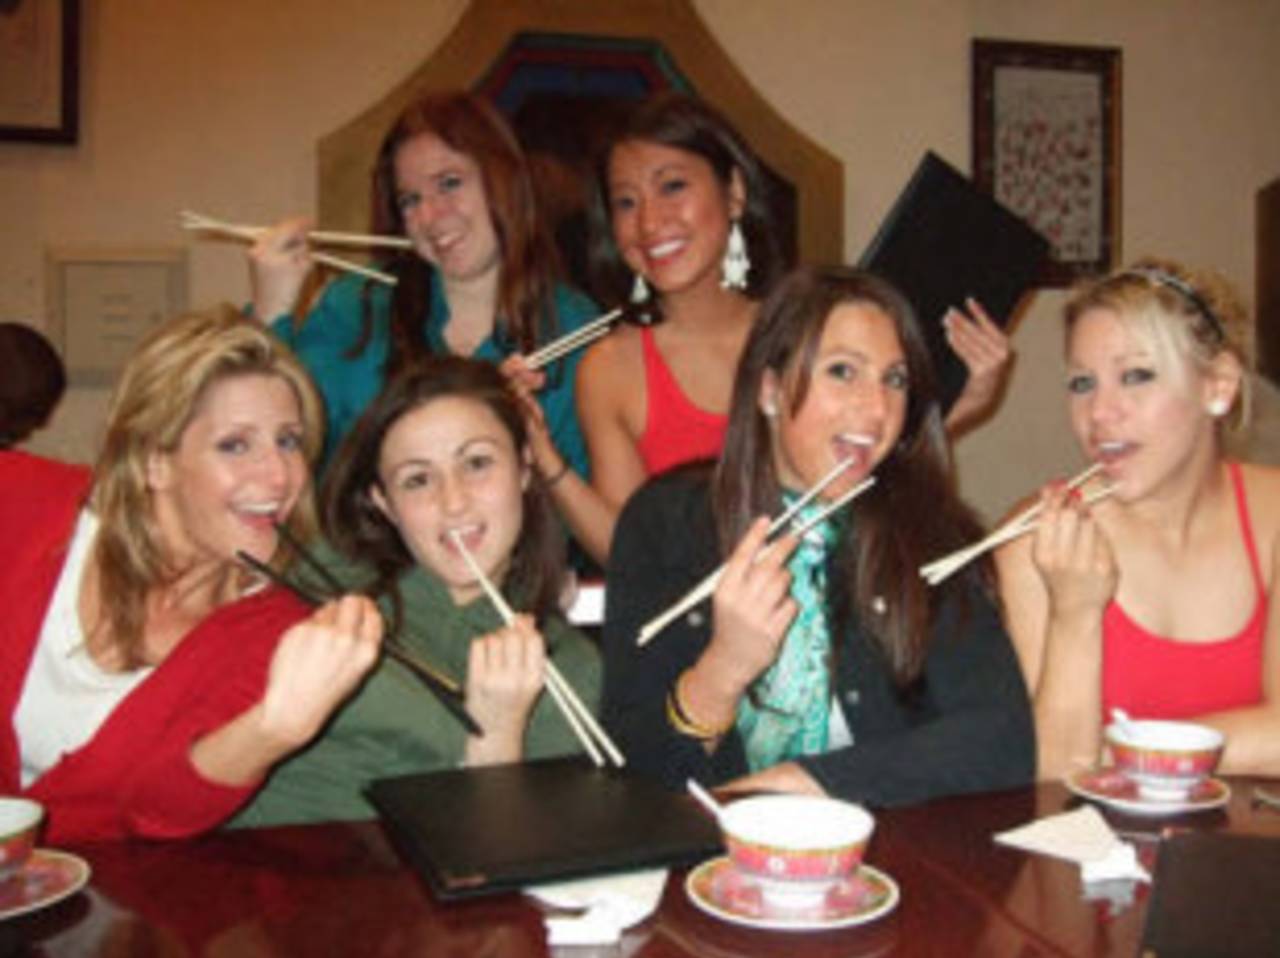 Members of Royal Challengers Bangalore's Mischief Gal cheerleader squad have a meal